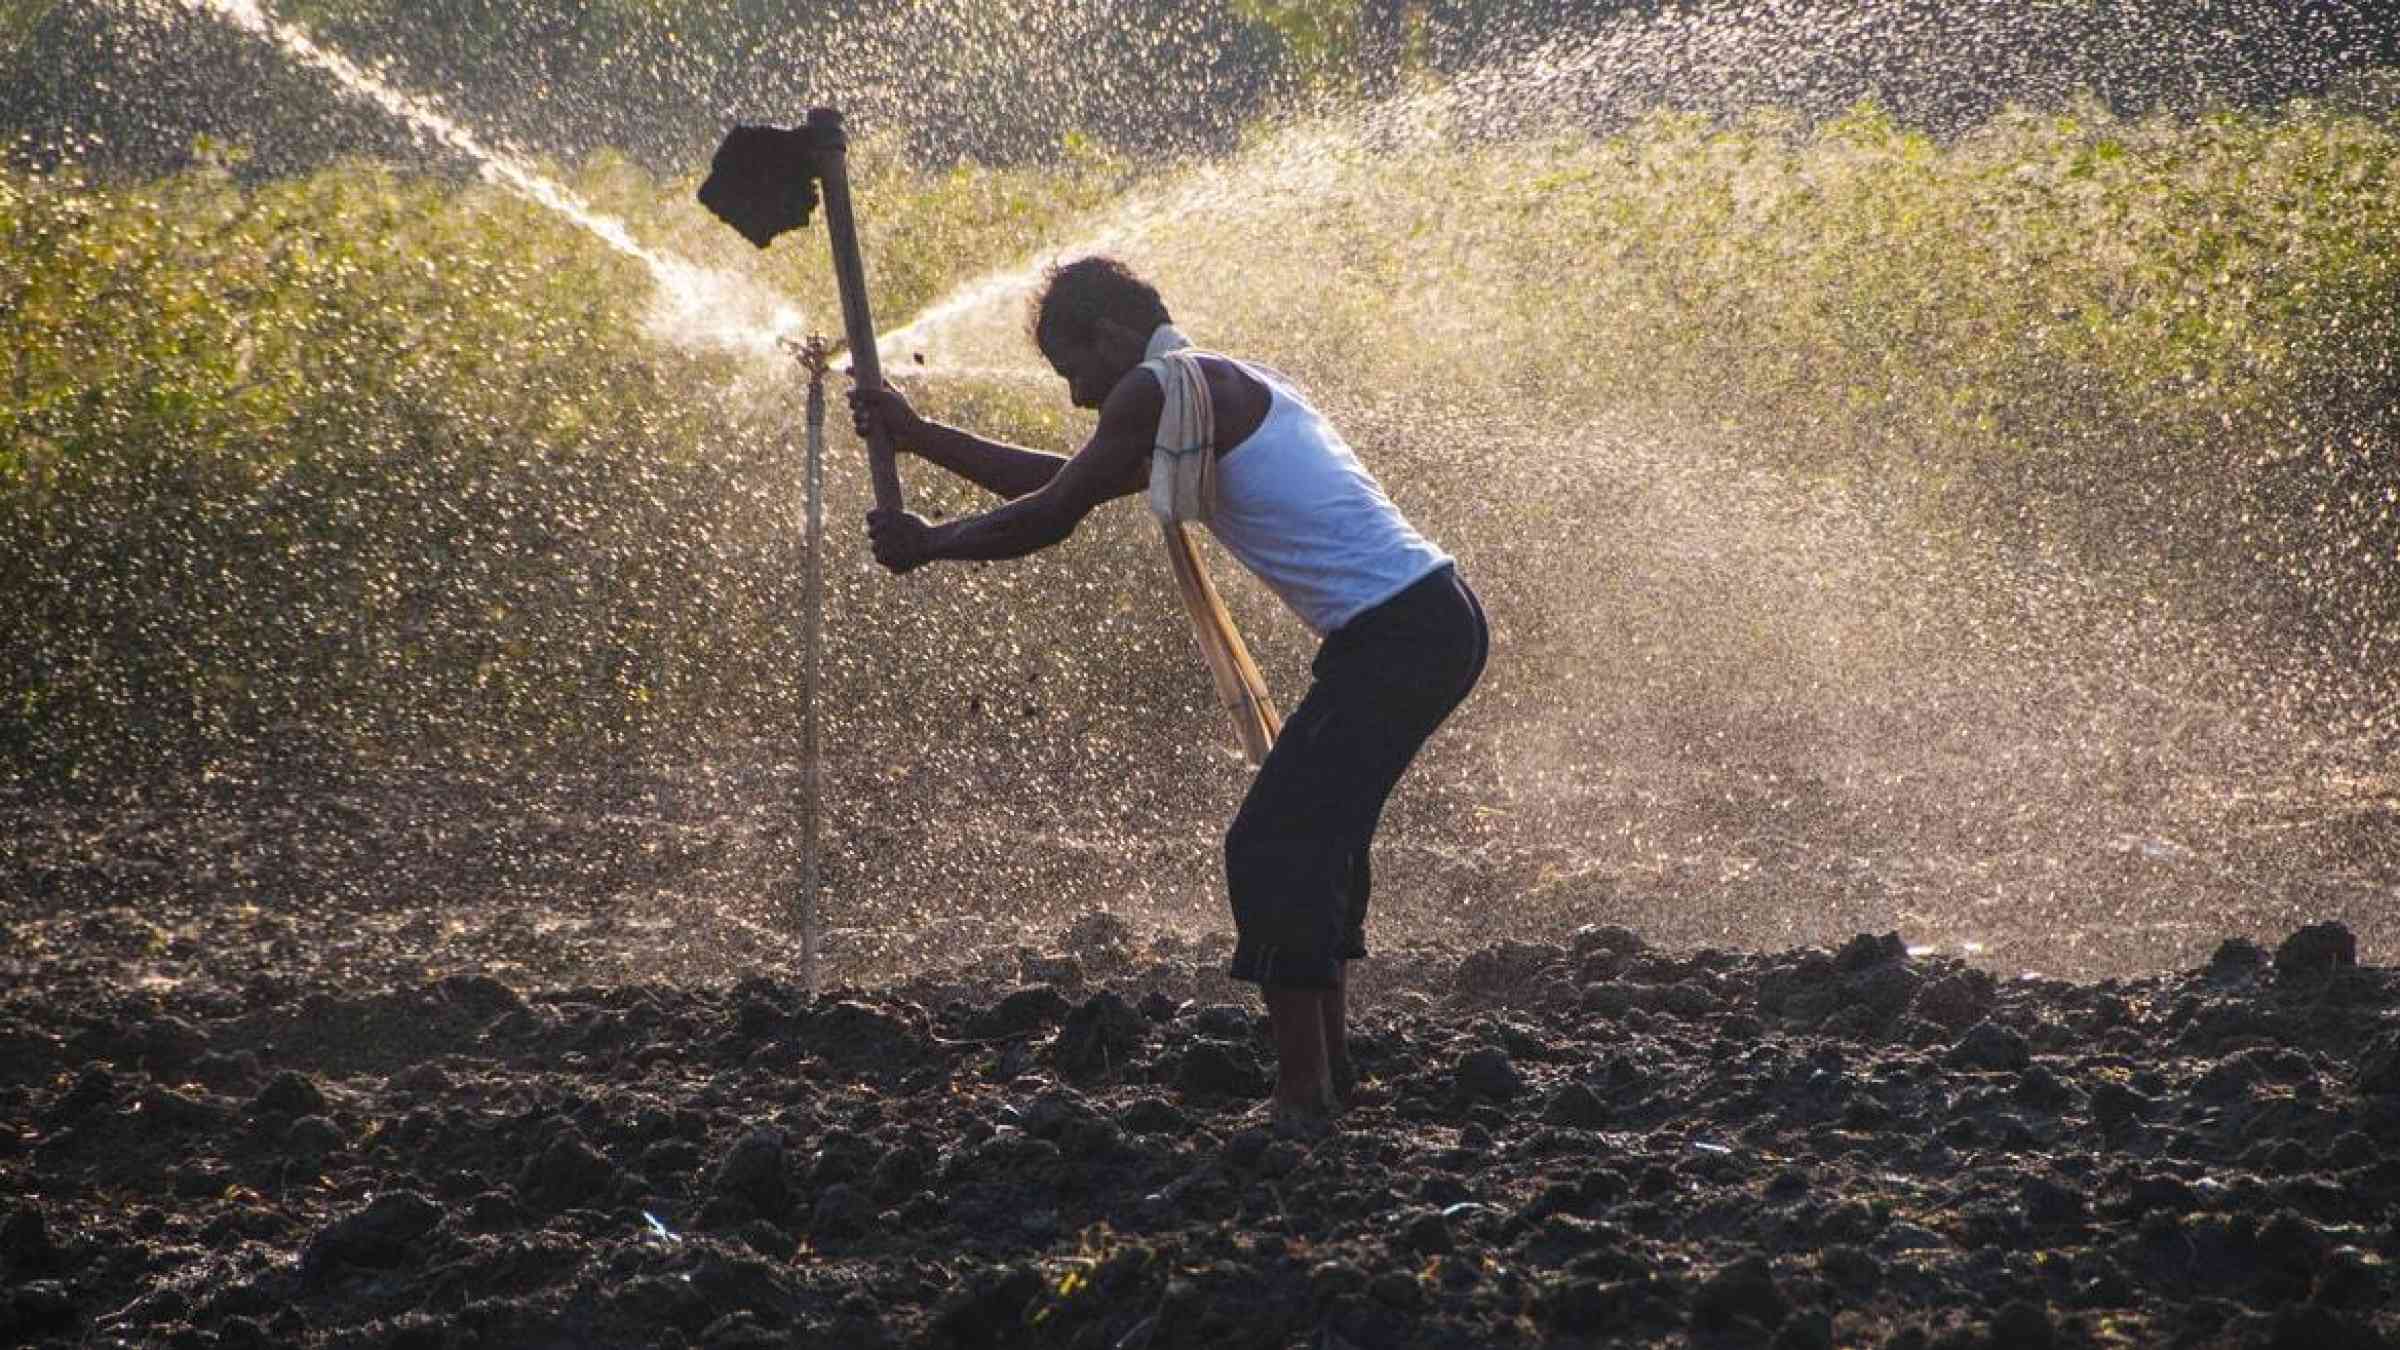 Indian farmer working in a field in front of a water sprinkler